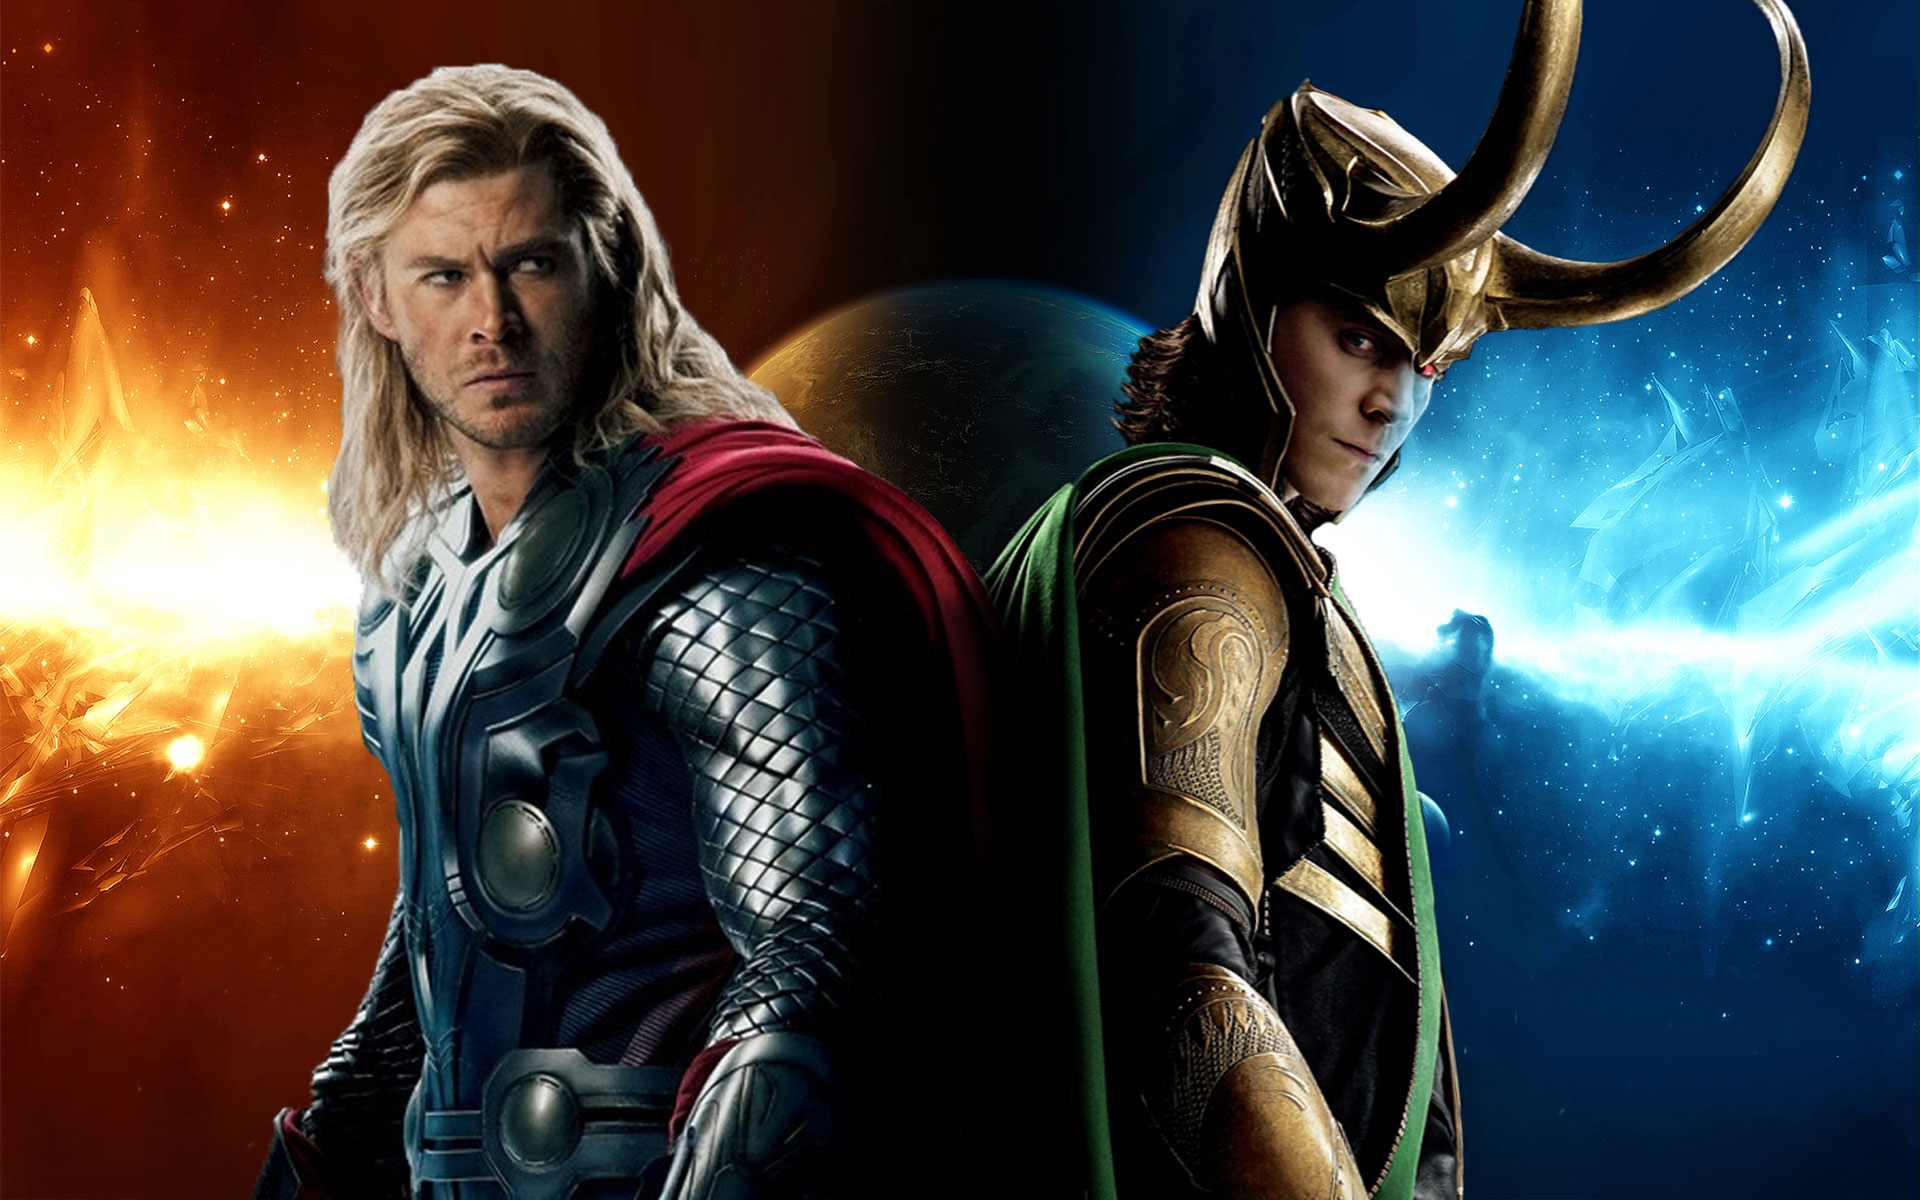 As many of you are probably aware, Thor: The Dark World, directed by Alan Taylor, premiered semi-recently. There was (and still is, for those who haven't ...